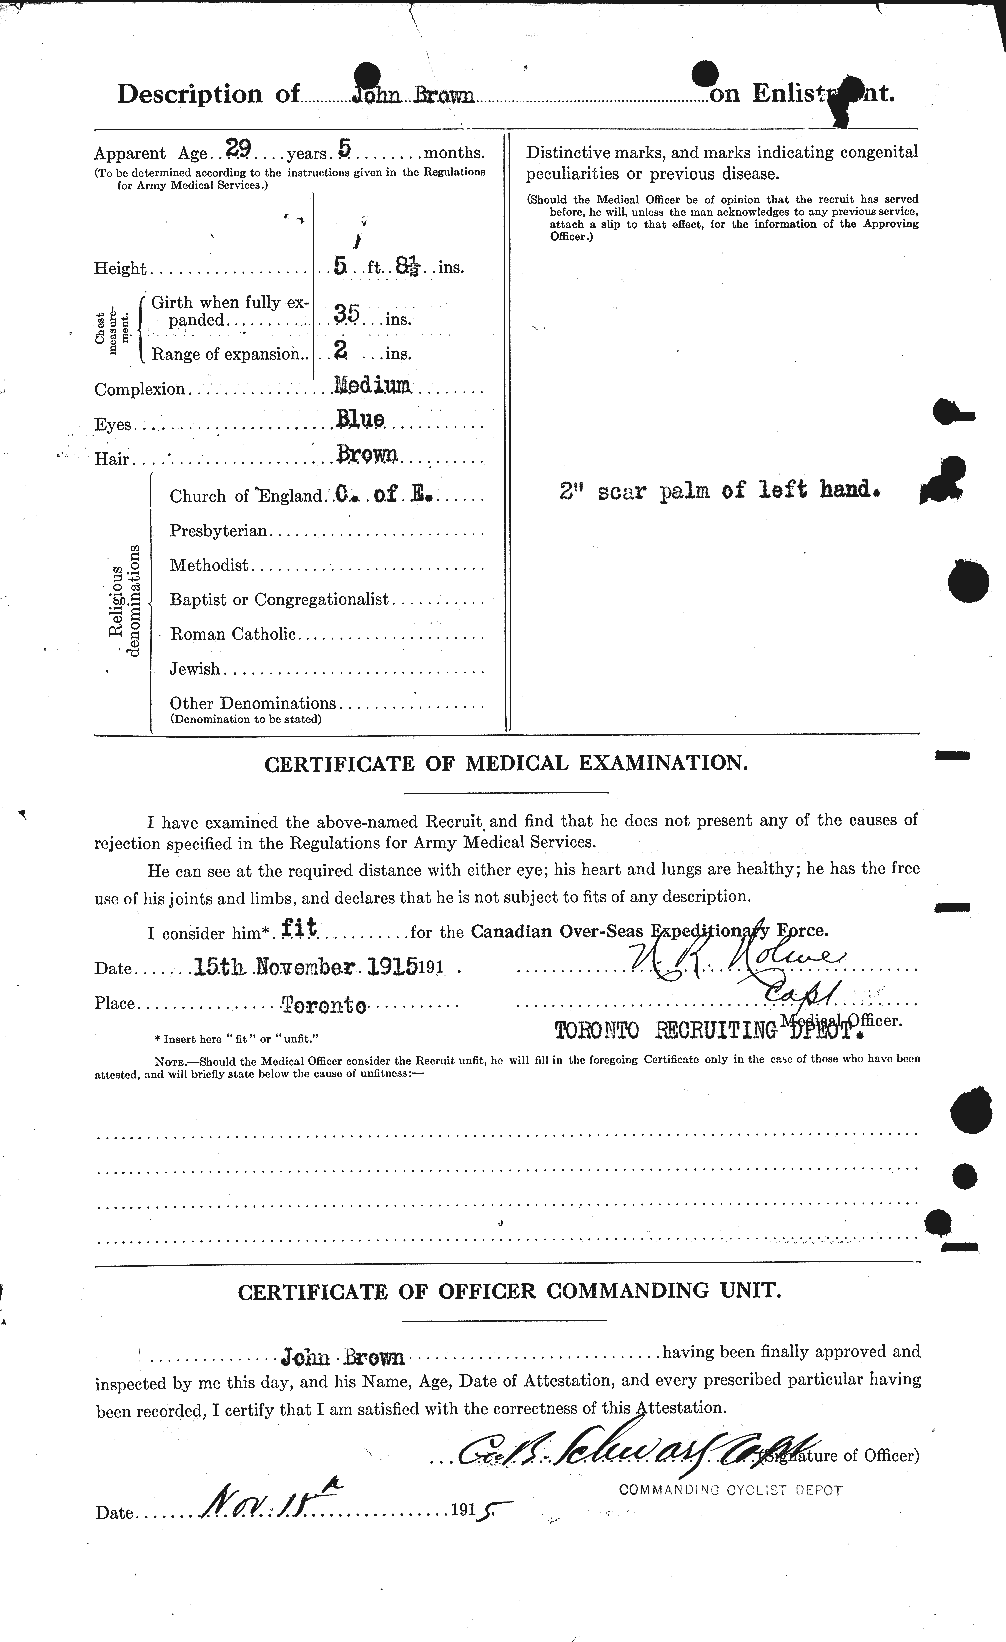 Personnel Records of the First World War - CEF 263899b